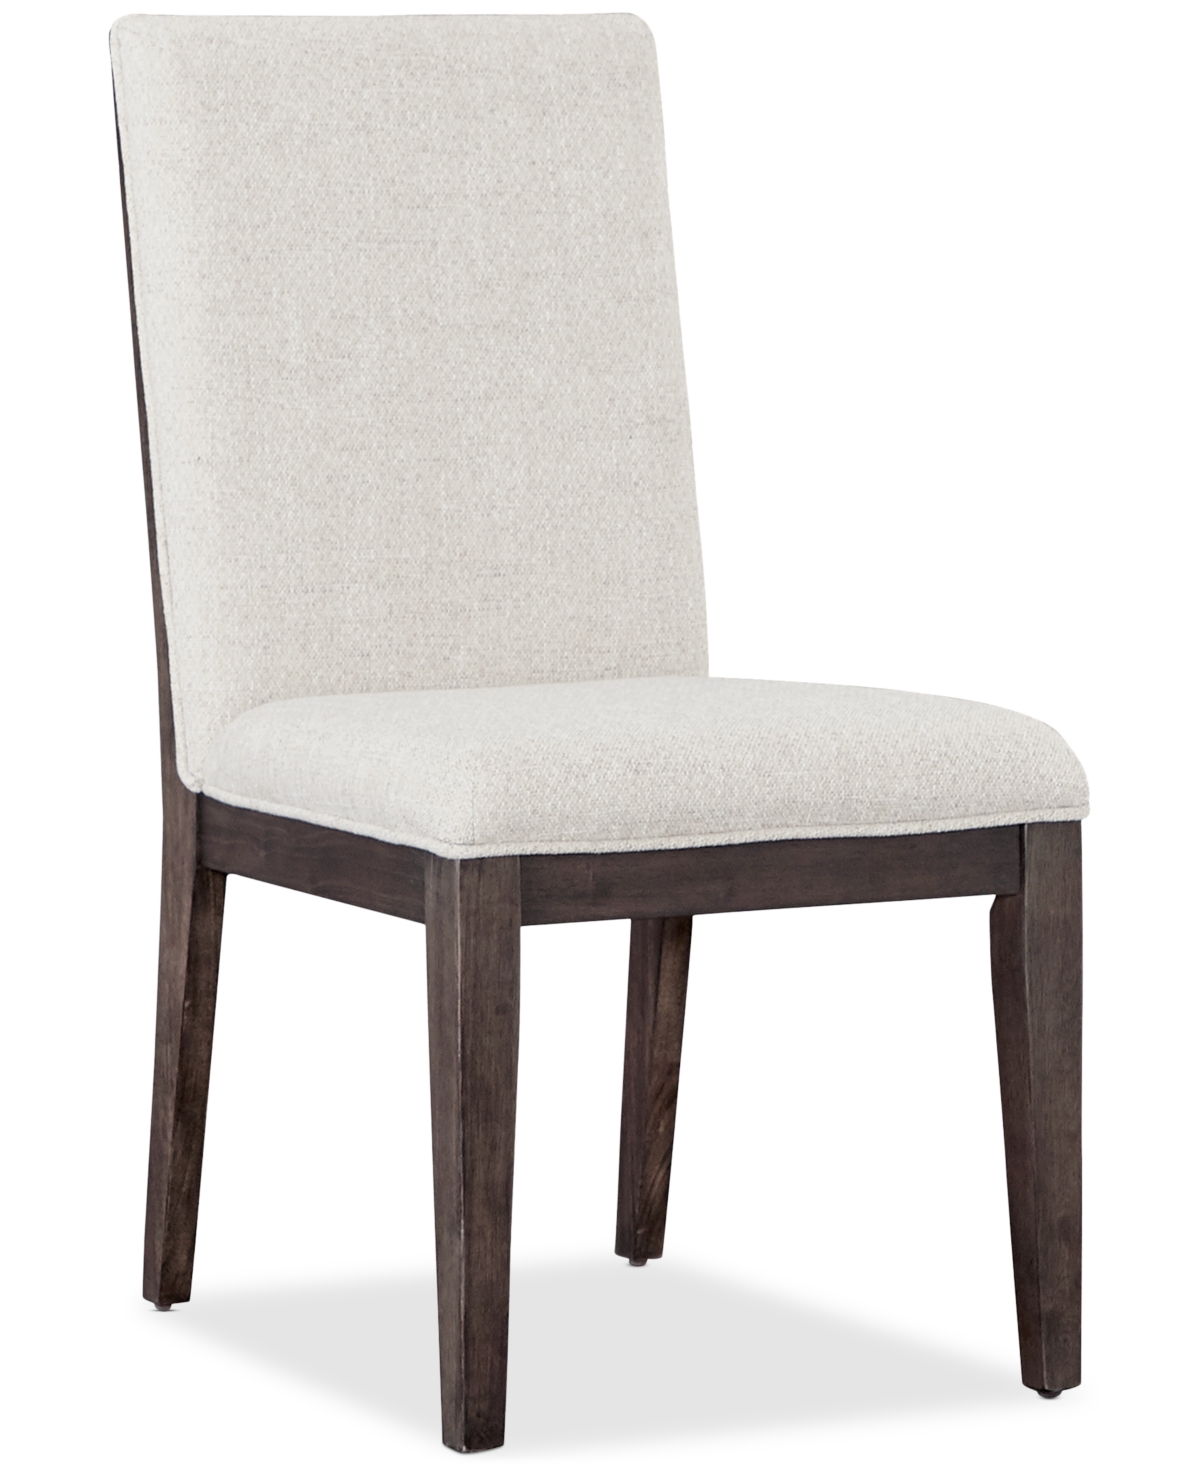 Aspenhome Beckett Upholstered Dining Side Chair In Dark Brown